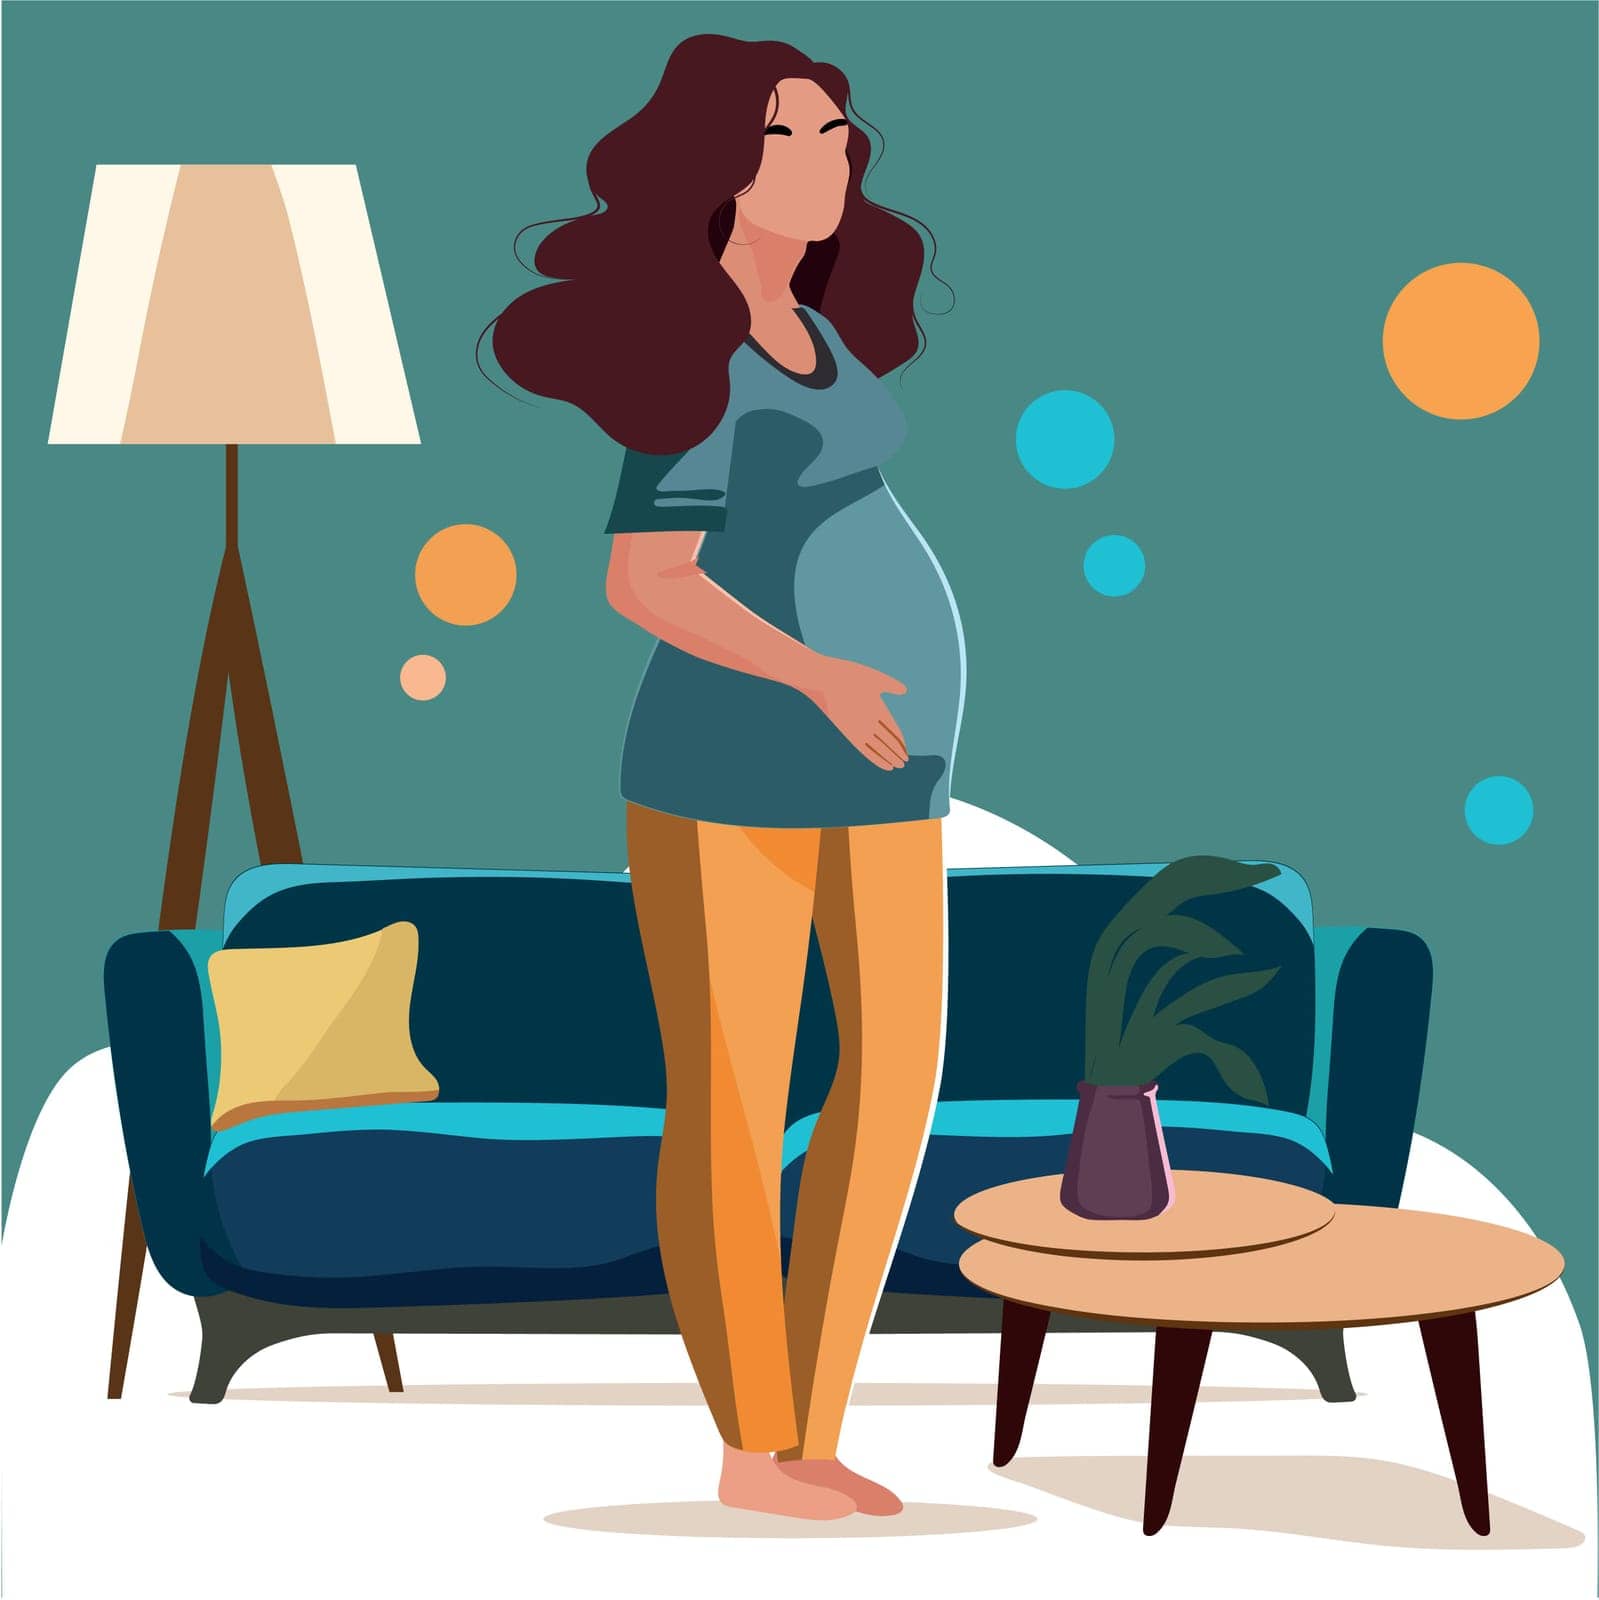 Pregnant woman, concept vector illustration in cute cartoon style, health, care, pregnancy by milastokerpro